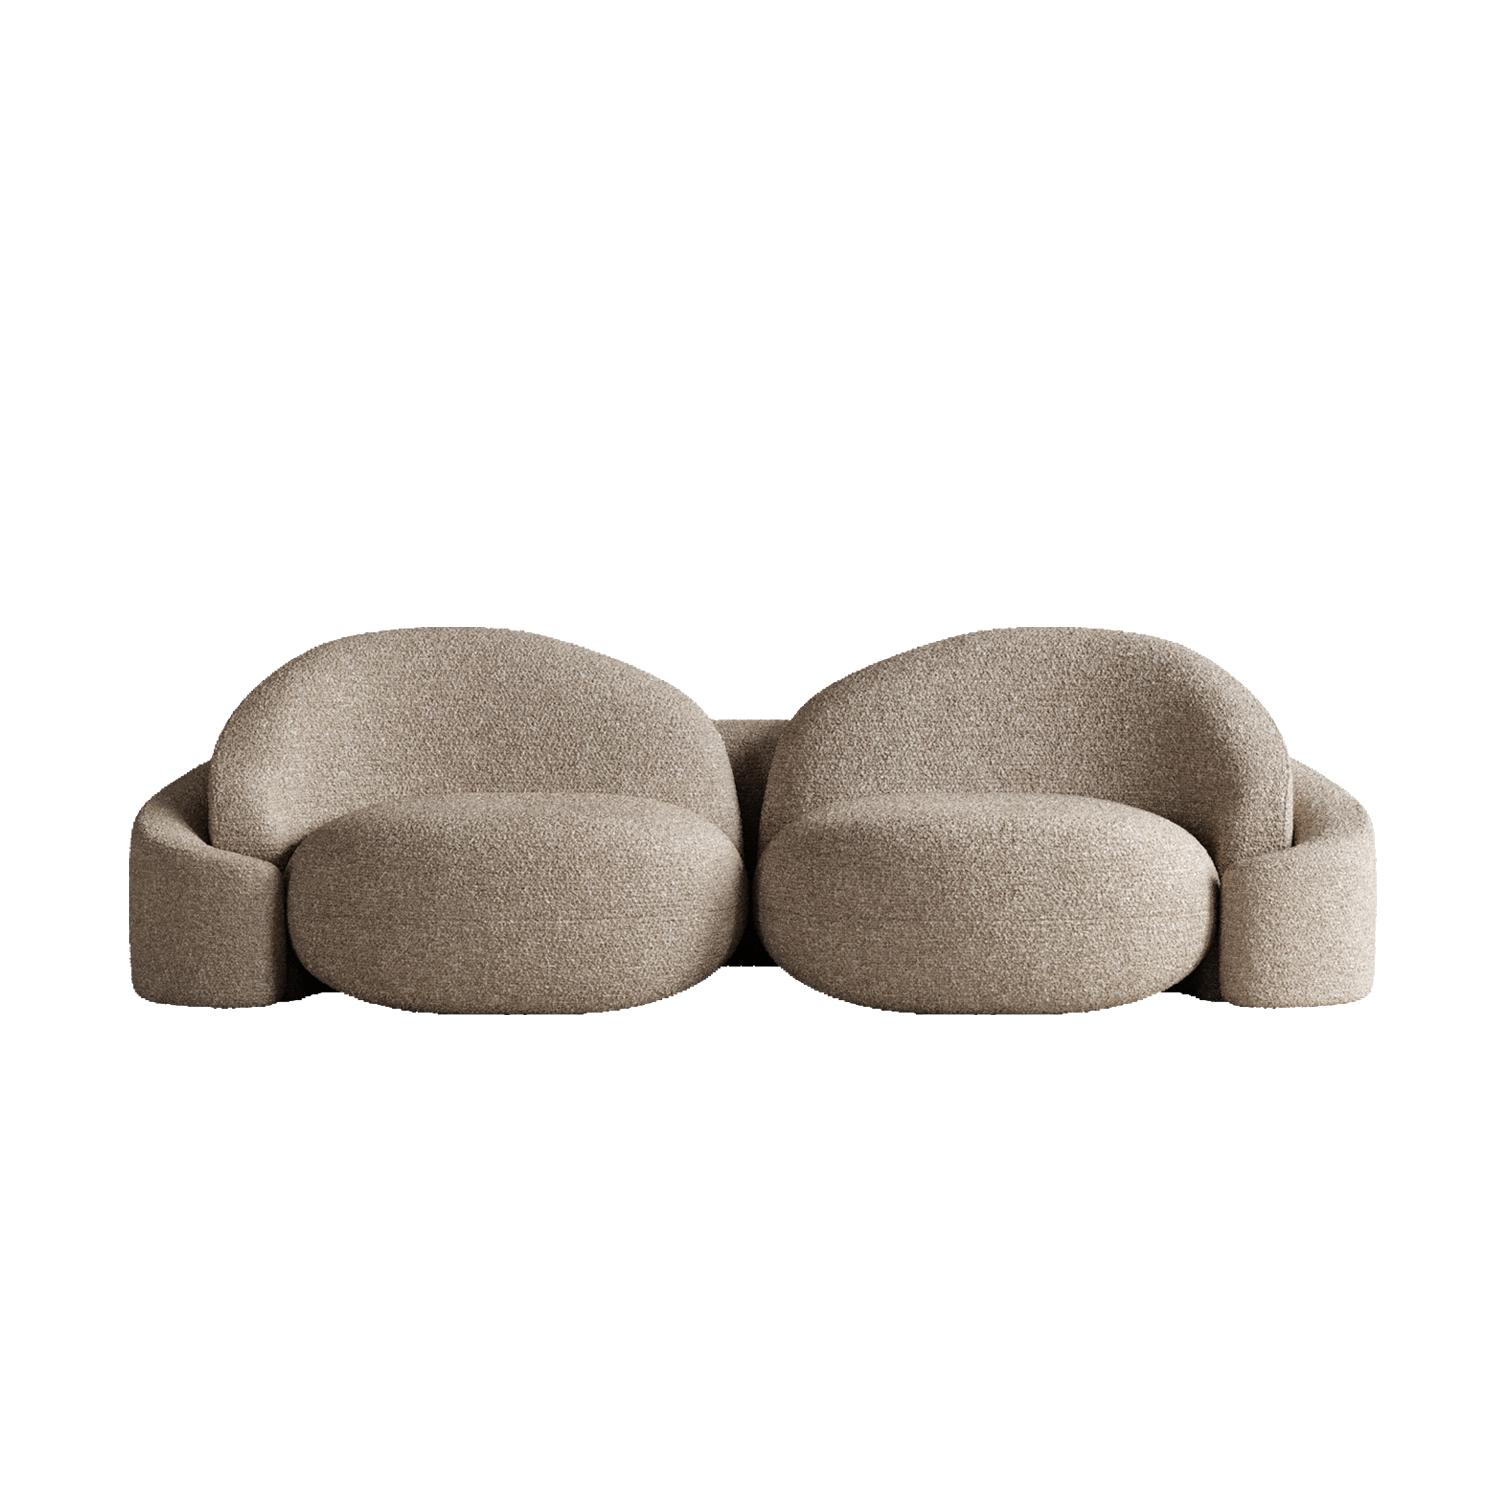 Beige Lovers Sofa by Plyus Design
Dimensions: D 110 x W 240 x H 73 cm
Materials:  Wood, HR foam, polyester wadding, fabric upholstery.

“Lovers” sofa.
Once upon a time there were two lonely chairs named 